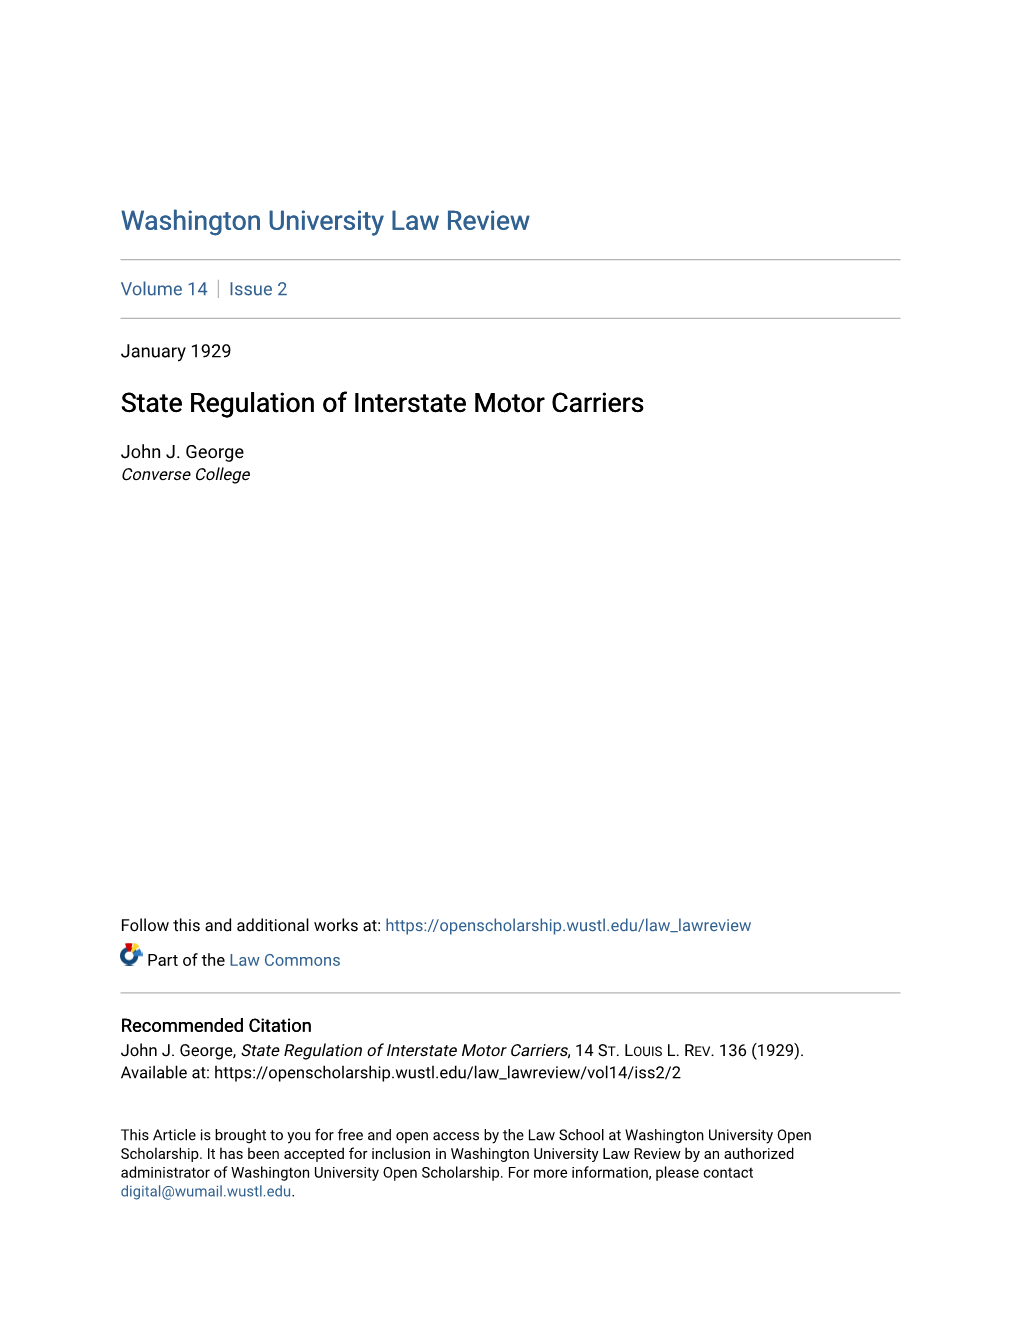 State Regulation of Interstate Motor Carriers